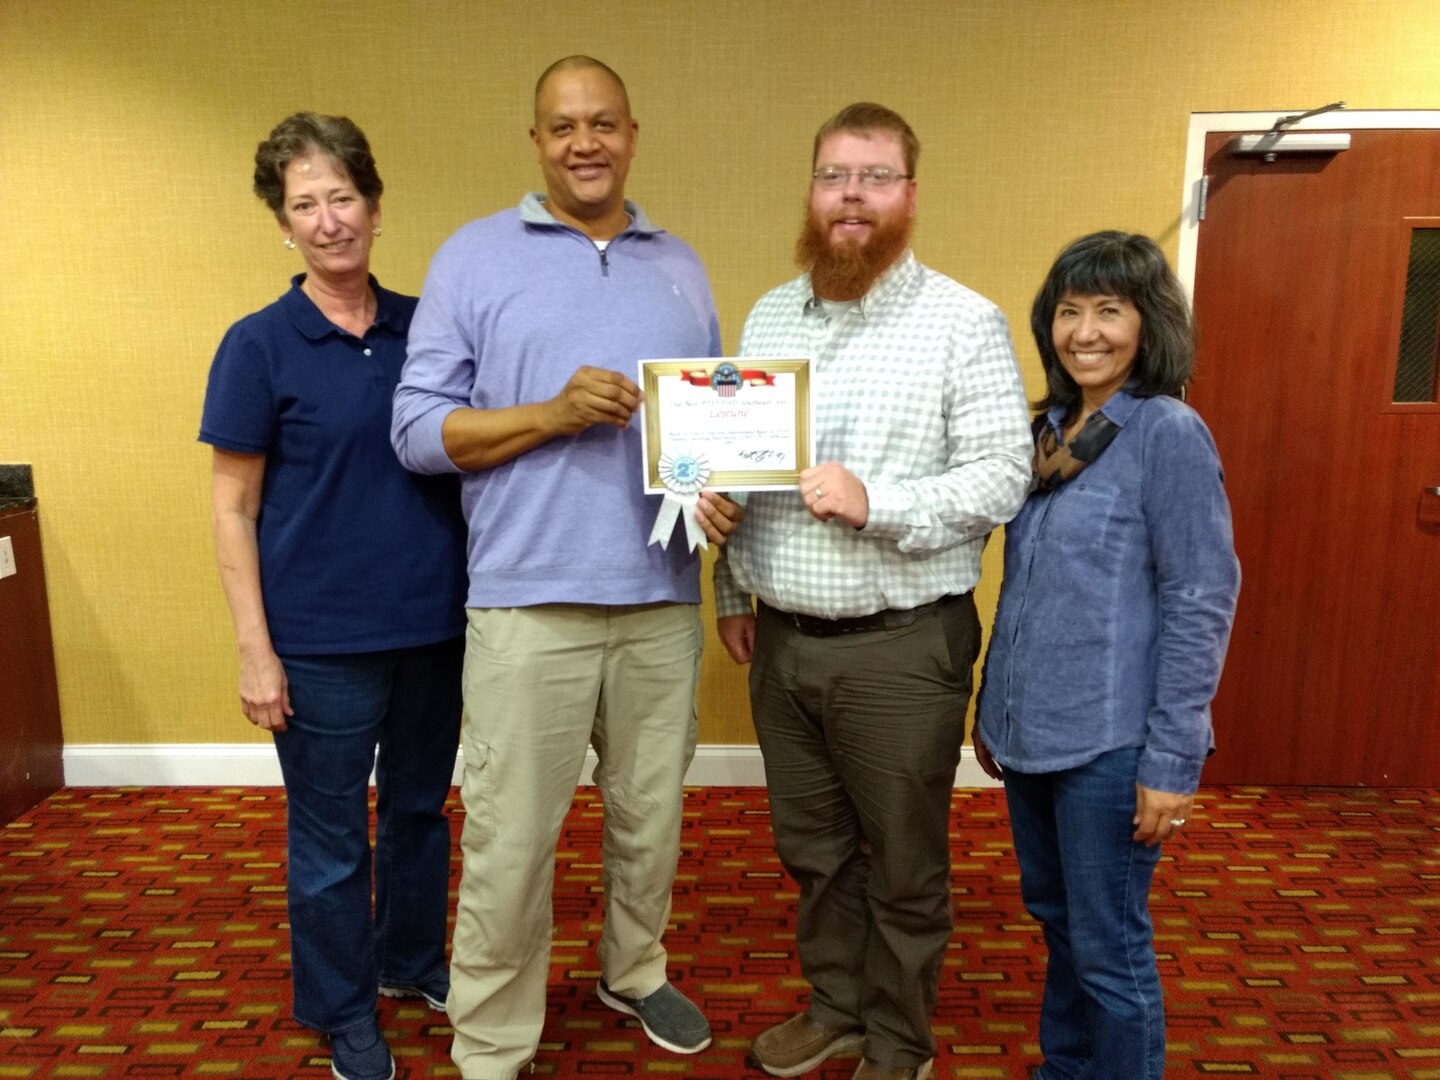 — Area Manager Kevin Vaughn (left center) and Warehouse Supervisor Lucas Grant (right center accept the second place site award from South-East Deputy Director Audrey Weber (far left) and South-East Director Kathy Atkins-Nuñez (far right).